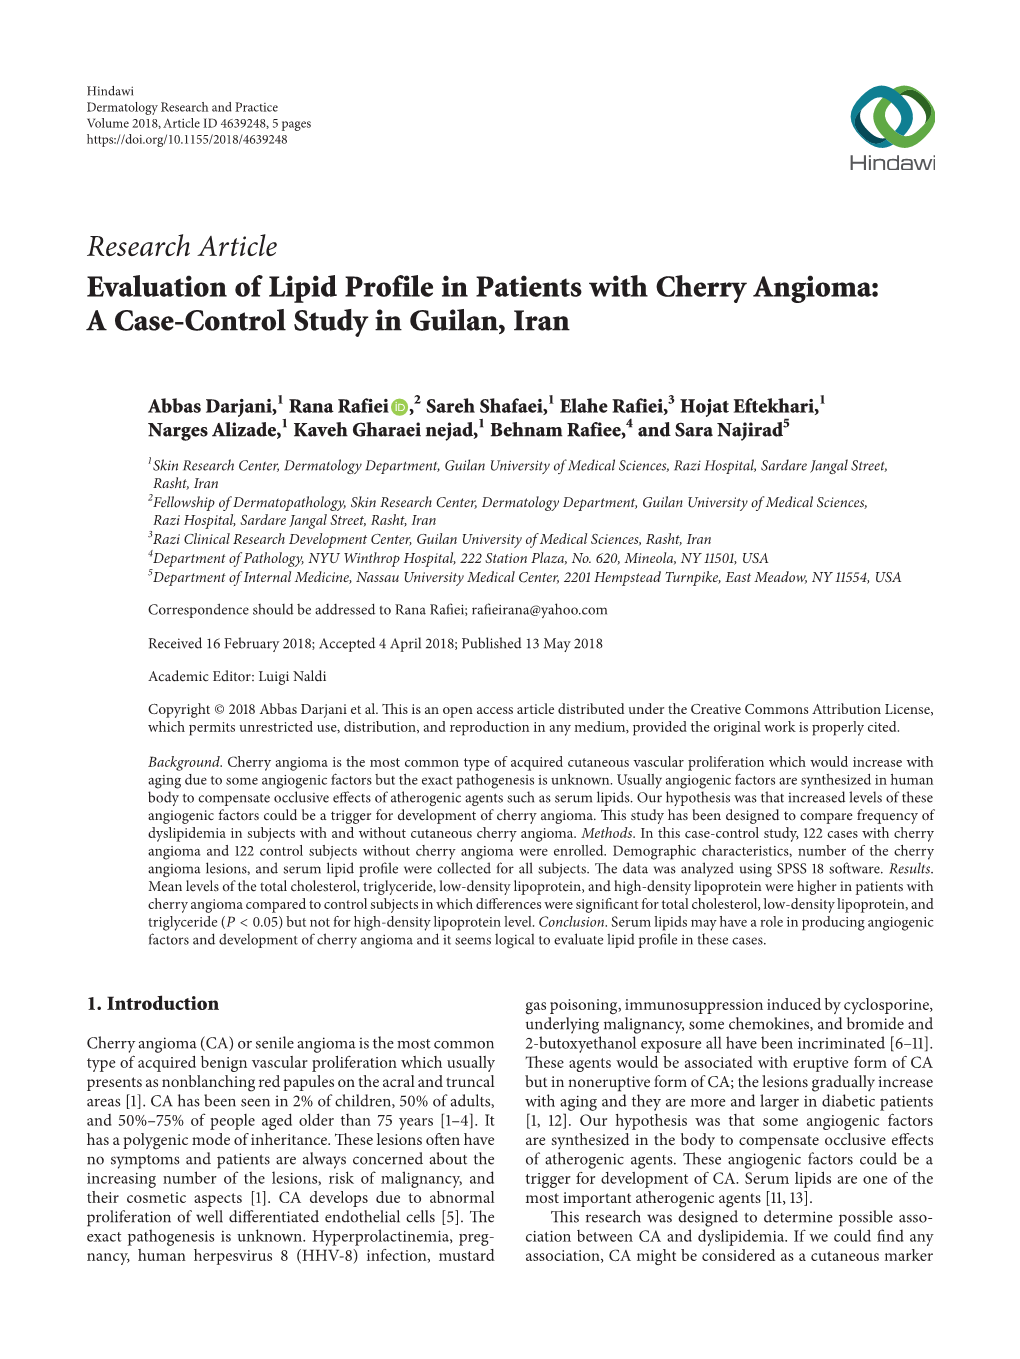 Evaluation of Lipid Profile in Patients with Cherry Angioma: a Case-Control Study in Guilan, Iran